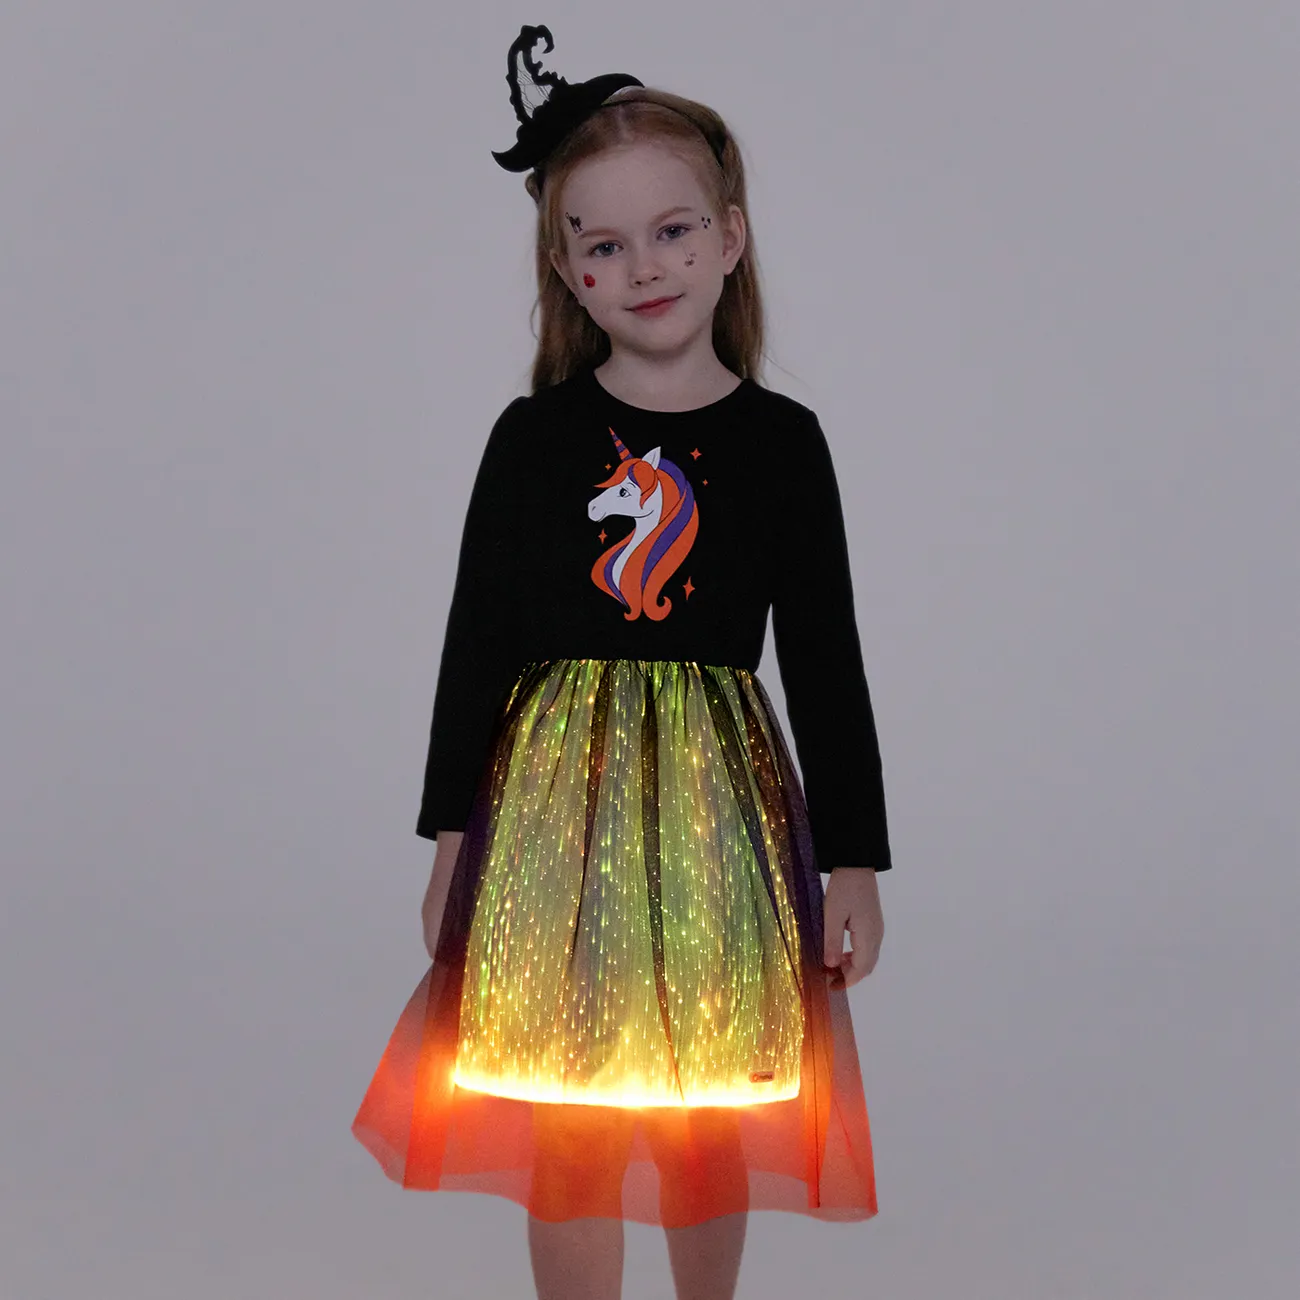 Go-Glow Illuminating Kid Unicorn Dress with Light Up Skirt Including Controller (Built-In Battery) Black big image 1